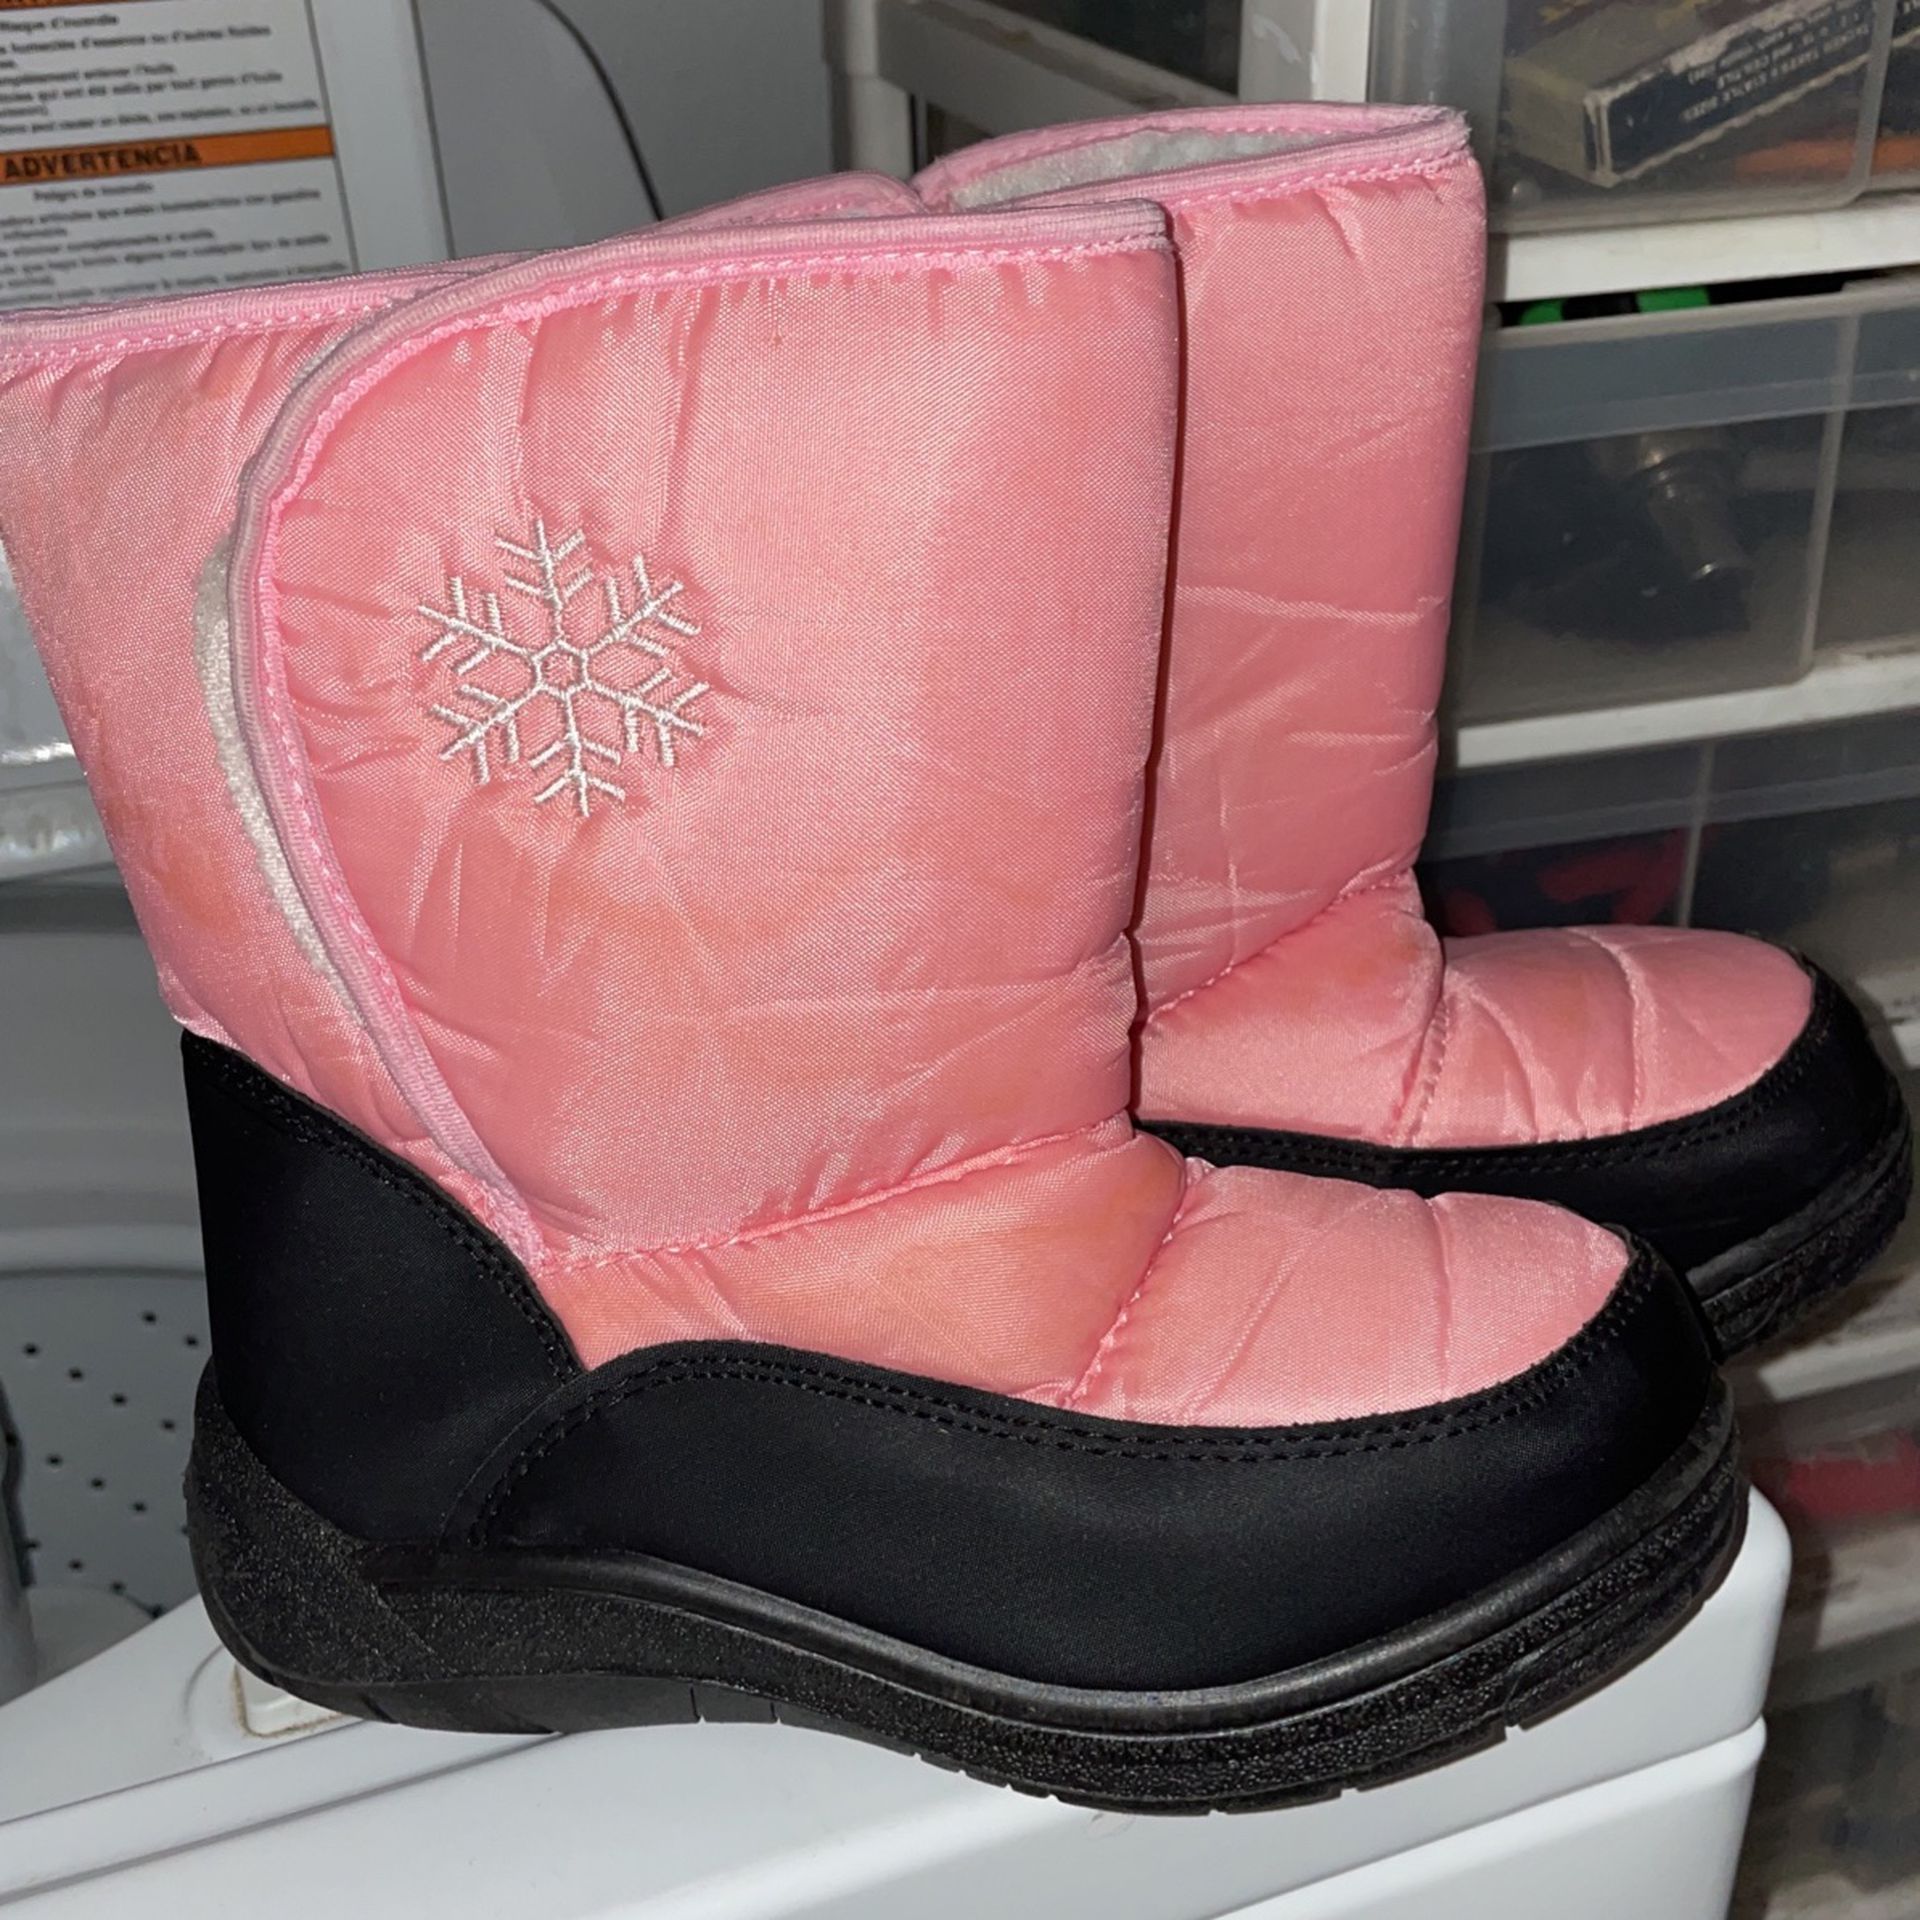 Girls Size 3 Snow Boots